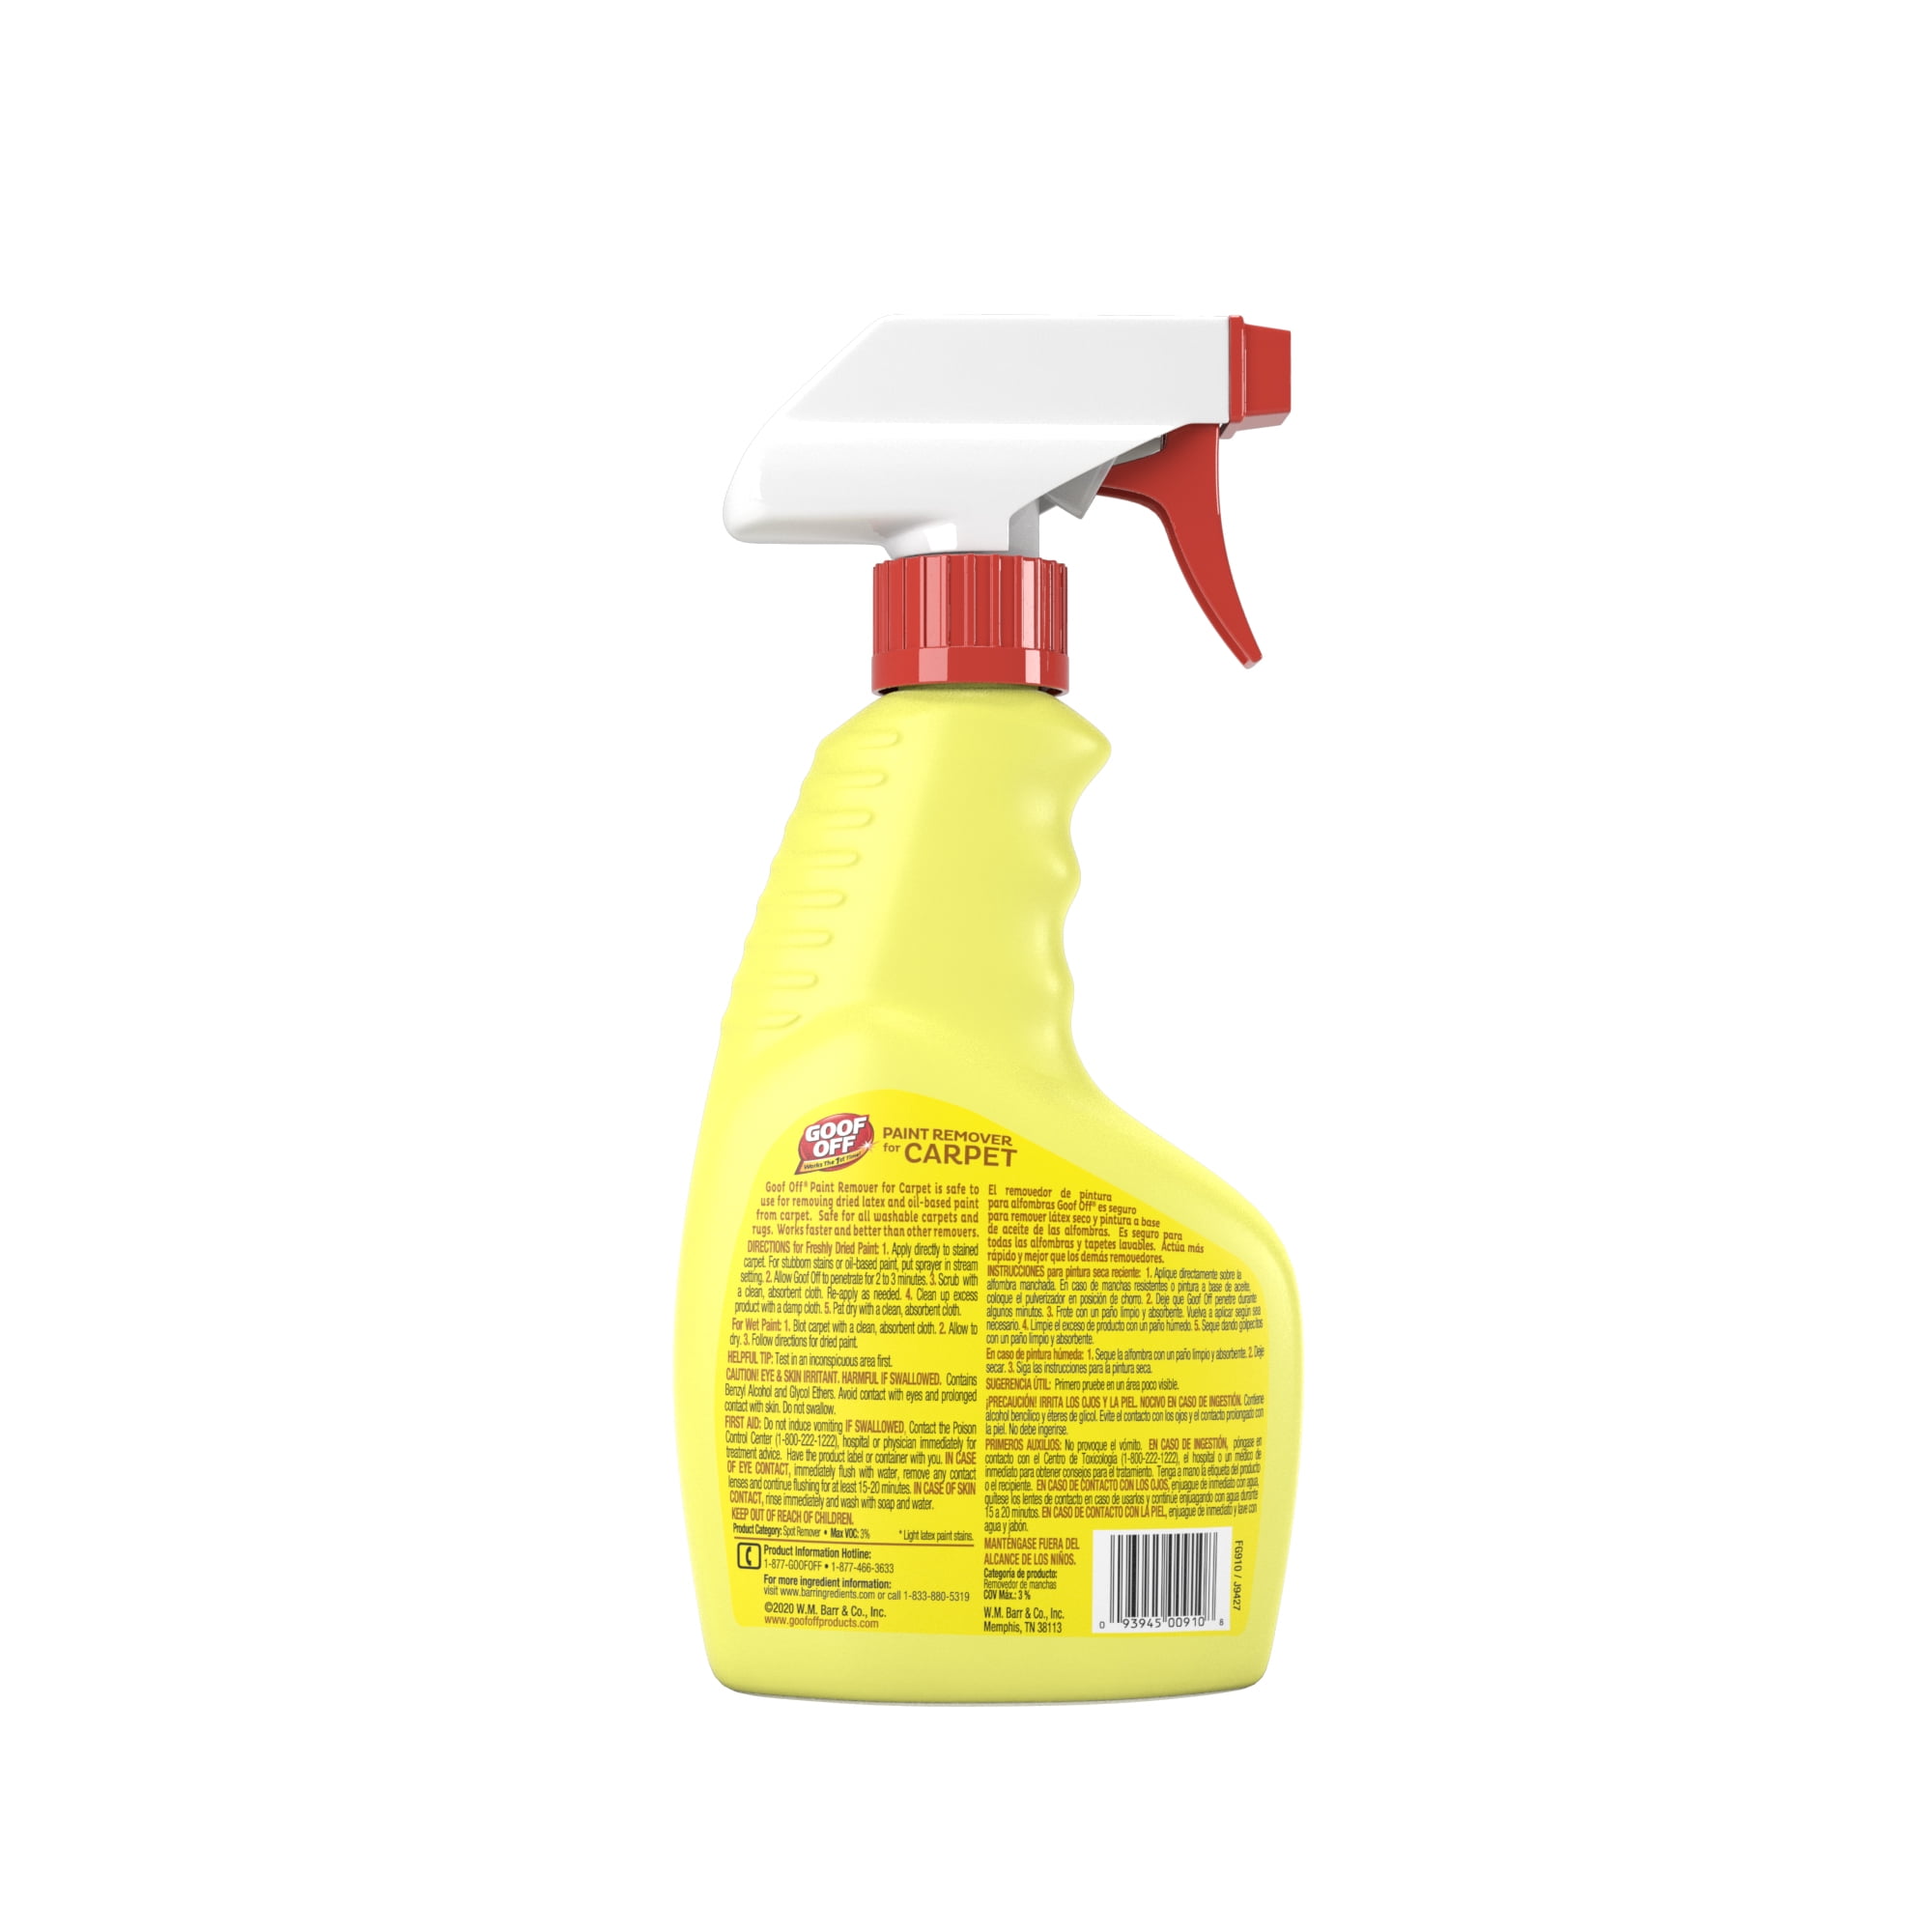  Goof Off FG910 Paint Remover Carpet Cleaner Solution